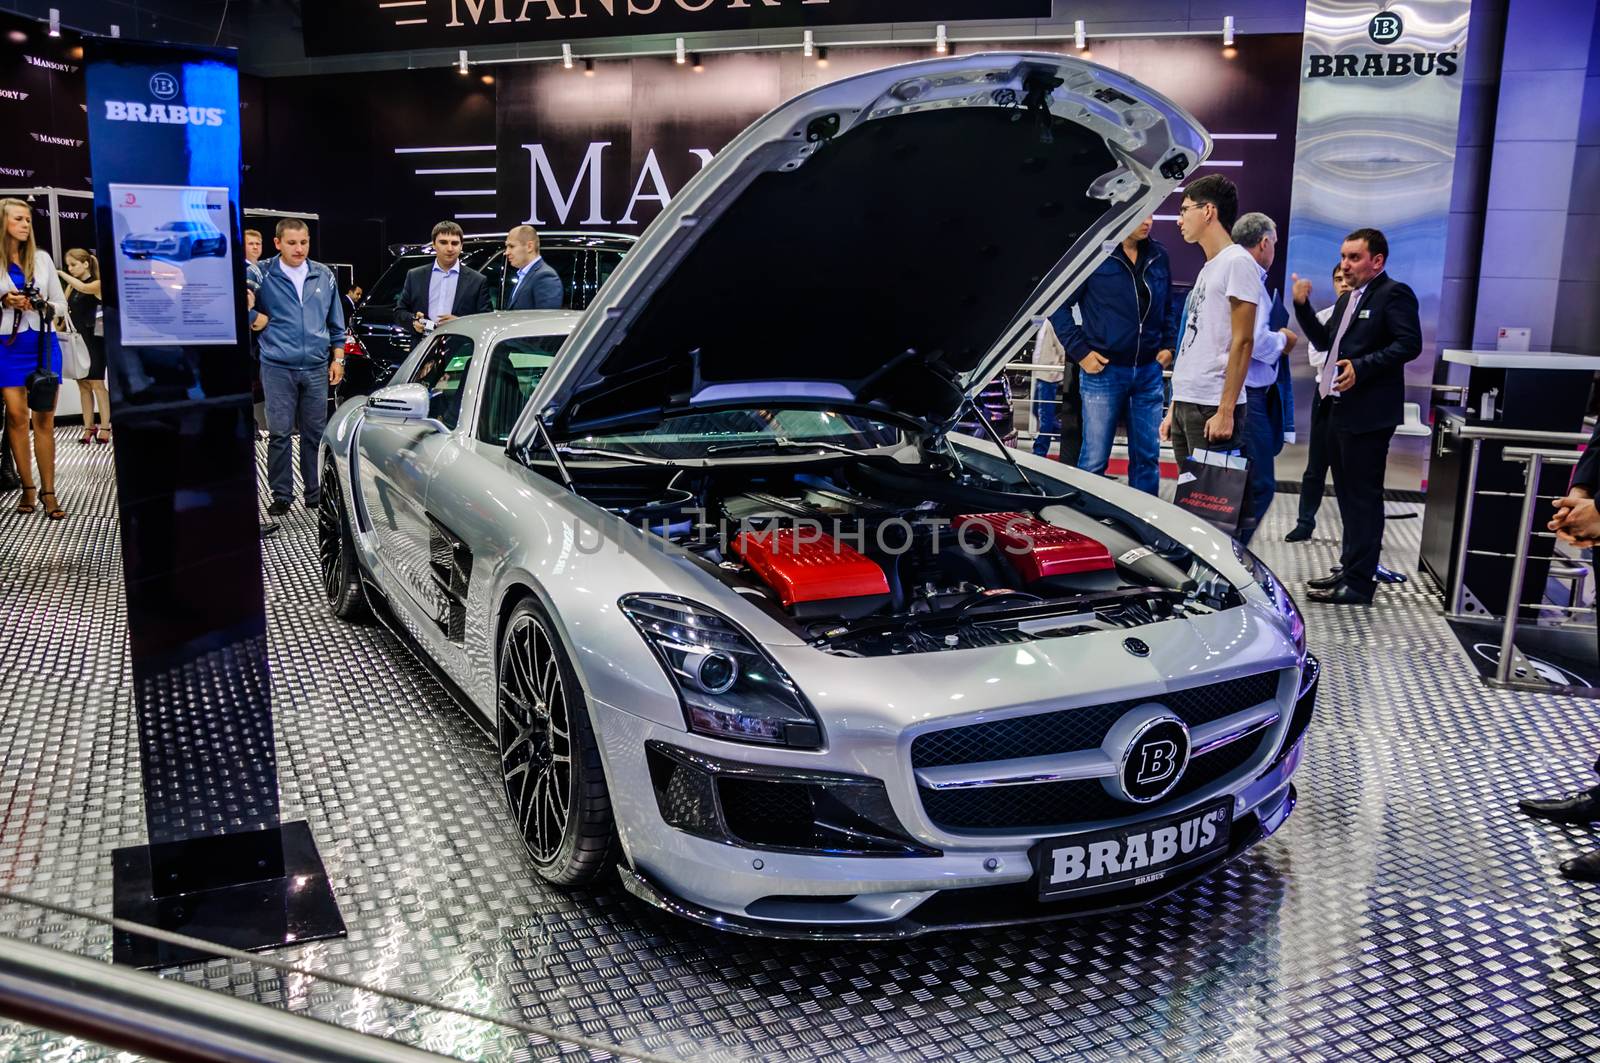 MOSCOW, RUSSIA - AUG 2012: MERCEDES-BENZ SLS AMG ROADSTER BRABUS presented as world premiere at the 16th MIAS (Moscow International Automobile Salon) on August 30, 2012 in Moscow, Russia